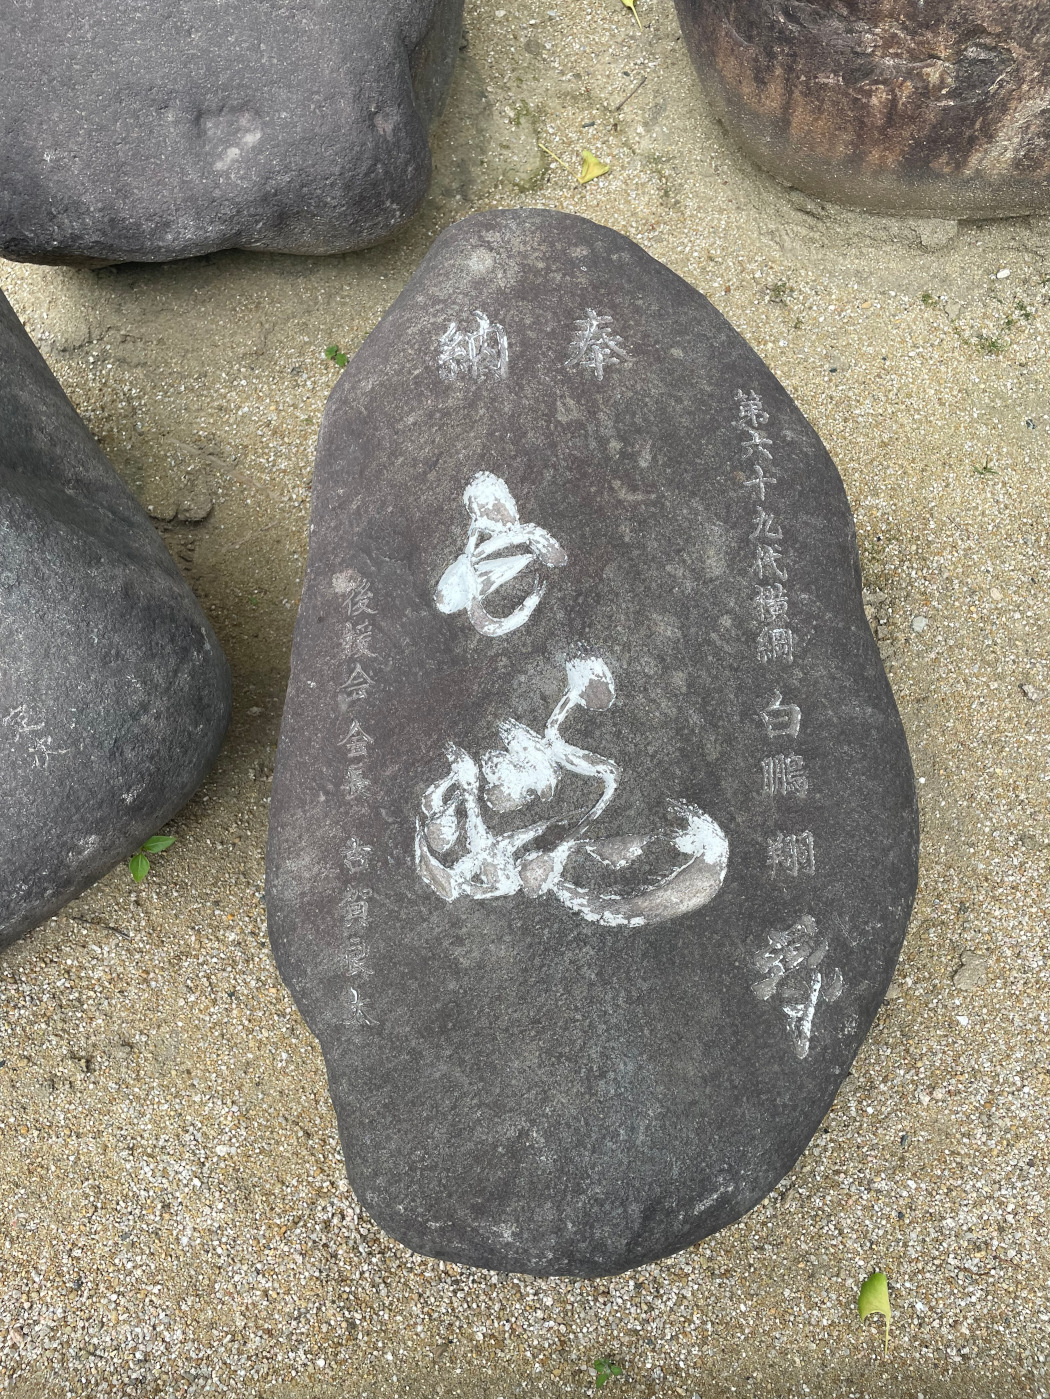 Hakuhō's power stone on display. The white paint in that filled the engravings is fading. On the bottom right-hand side of the stone is the kanji 夢, which Hakuhō engraved himself.